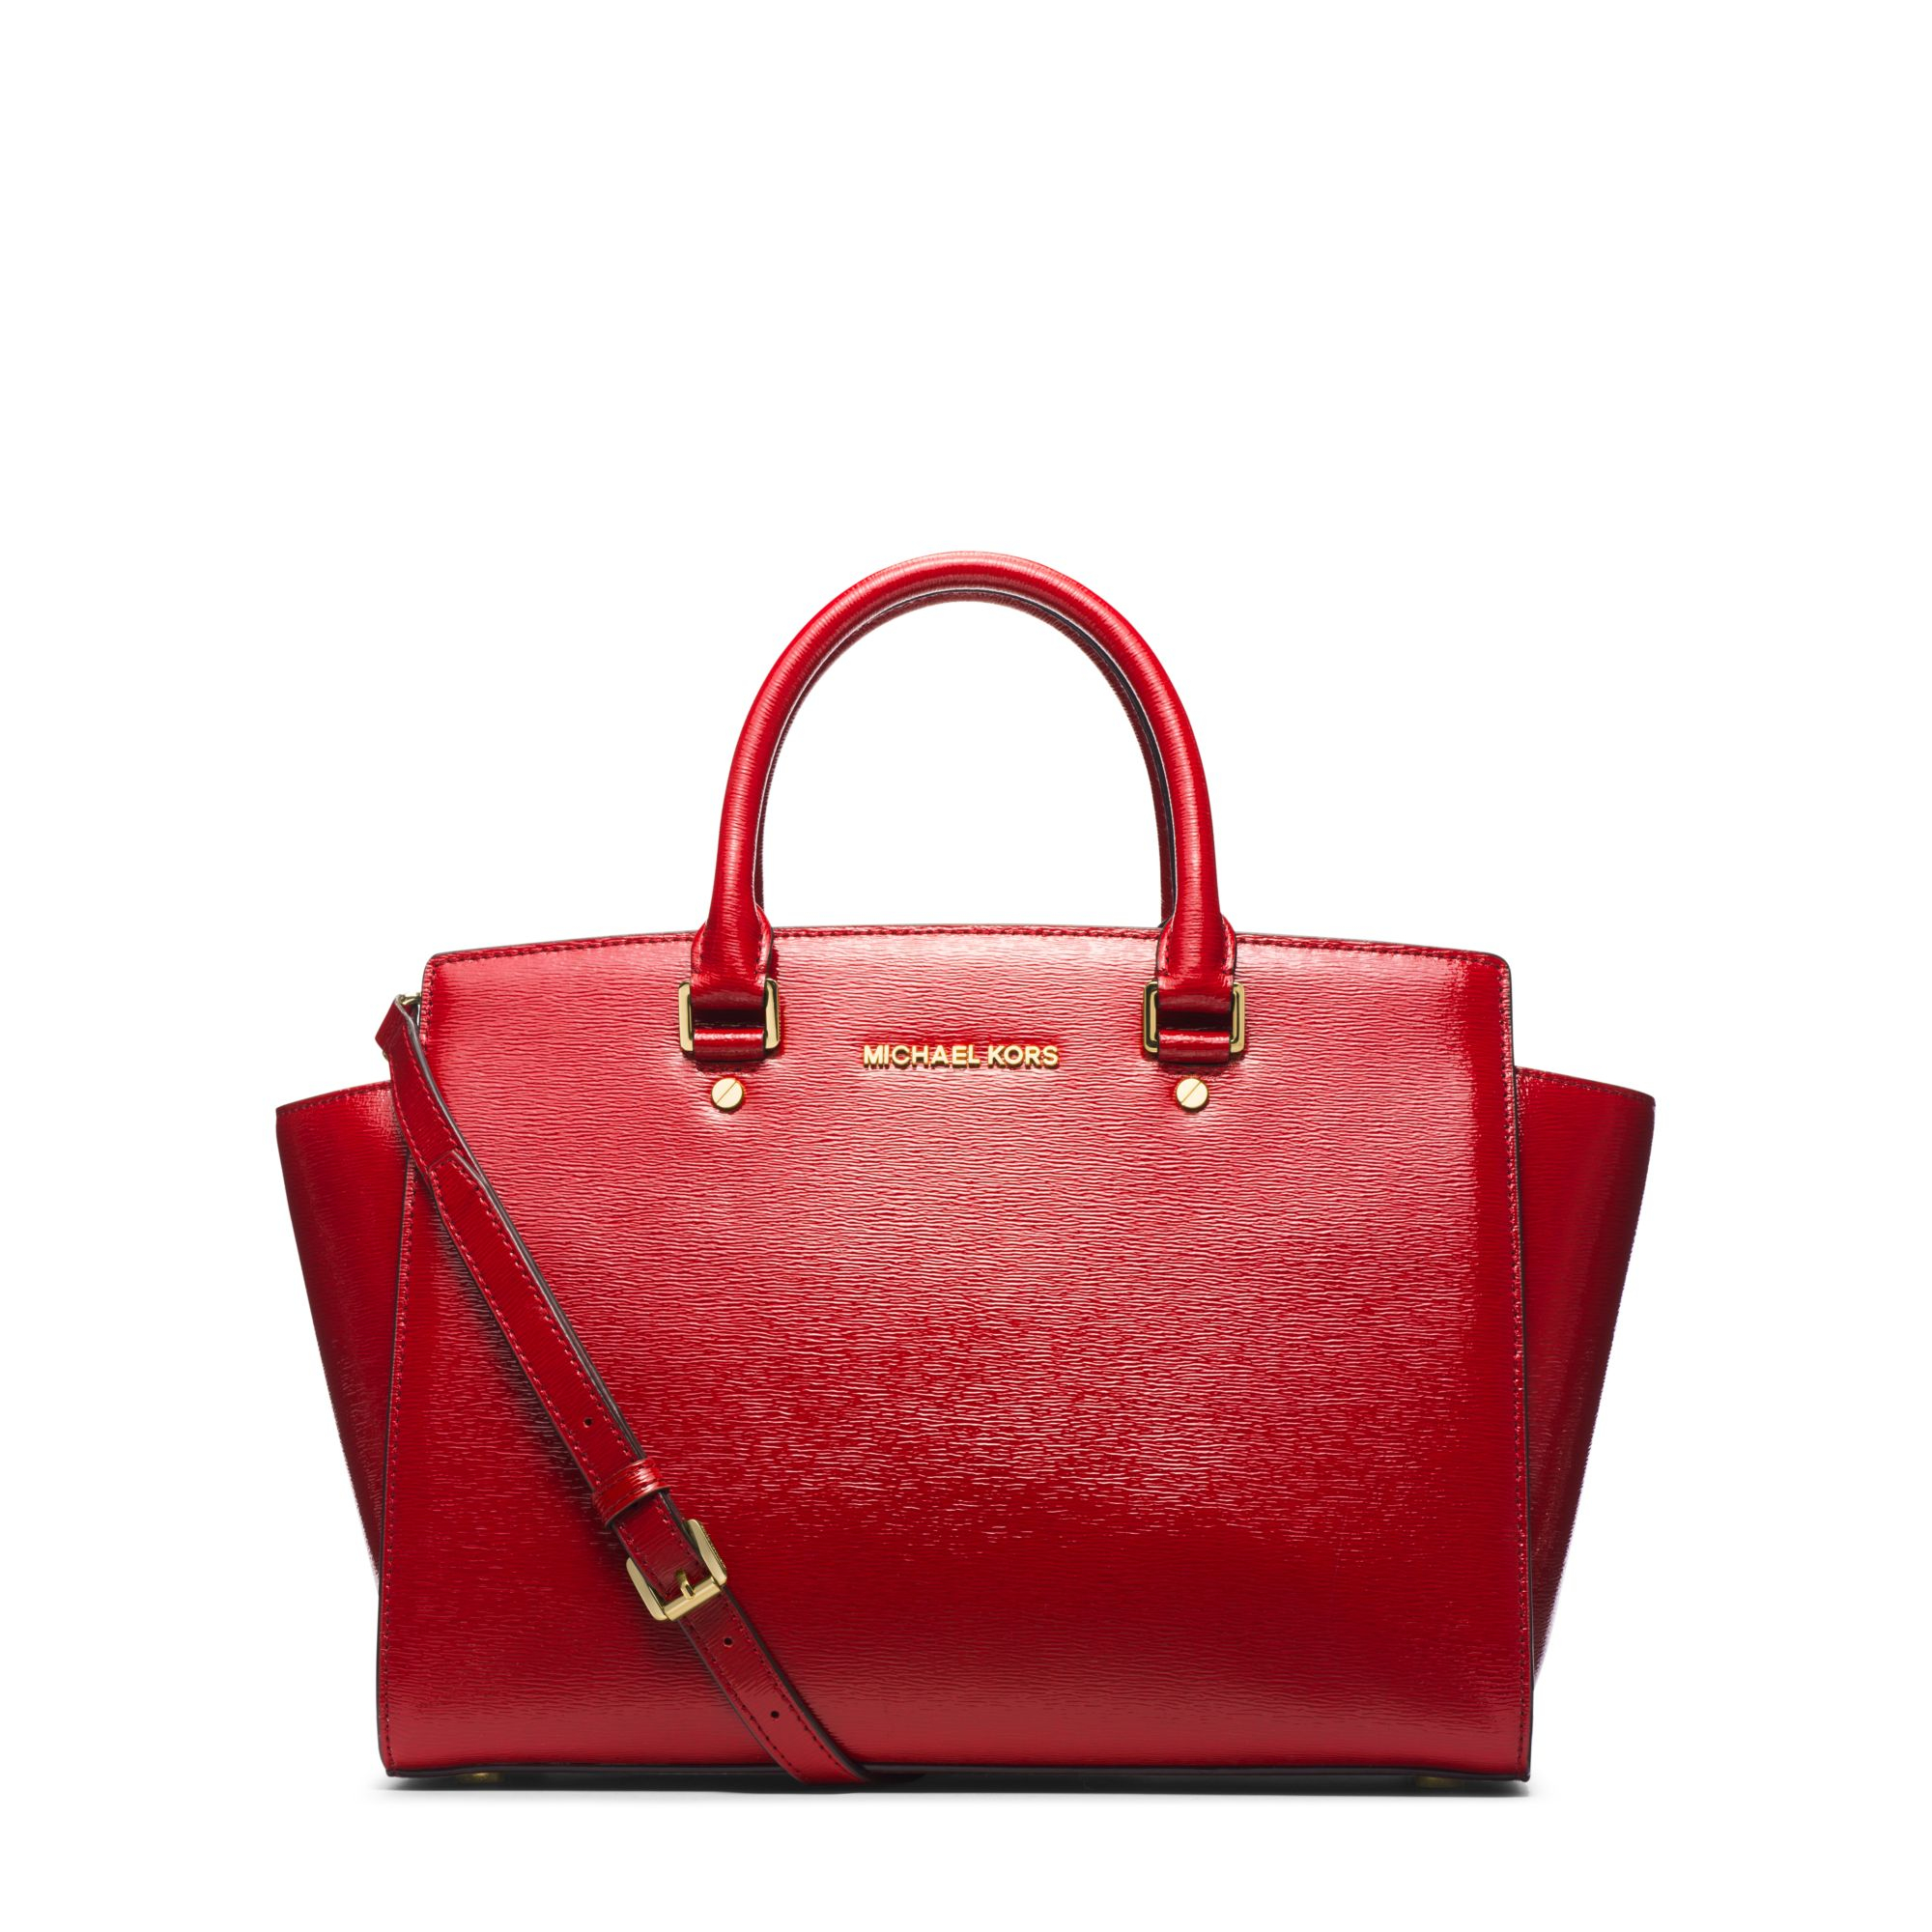 Michael Kors Selma Large Patent-Leather Satchel in Dark Red (Red) - Lyst